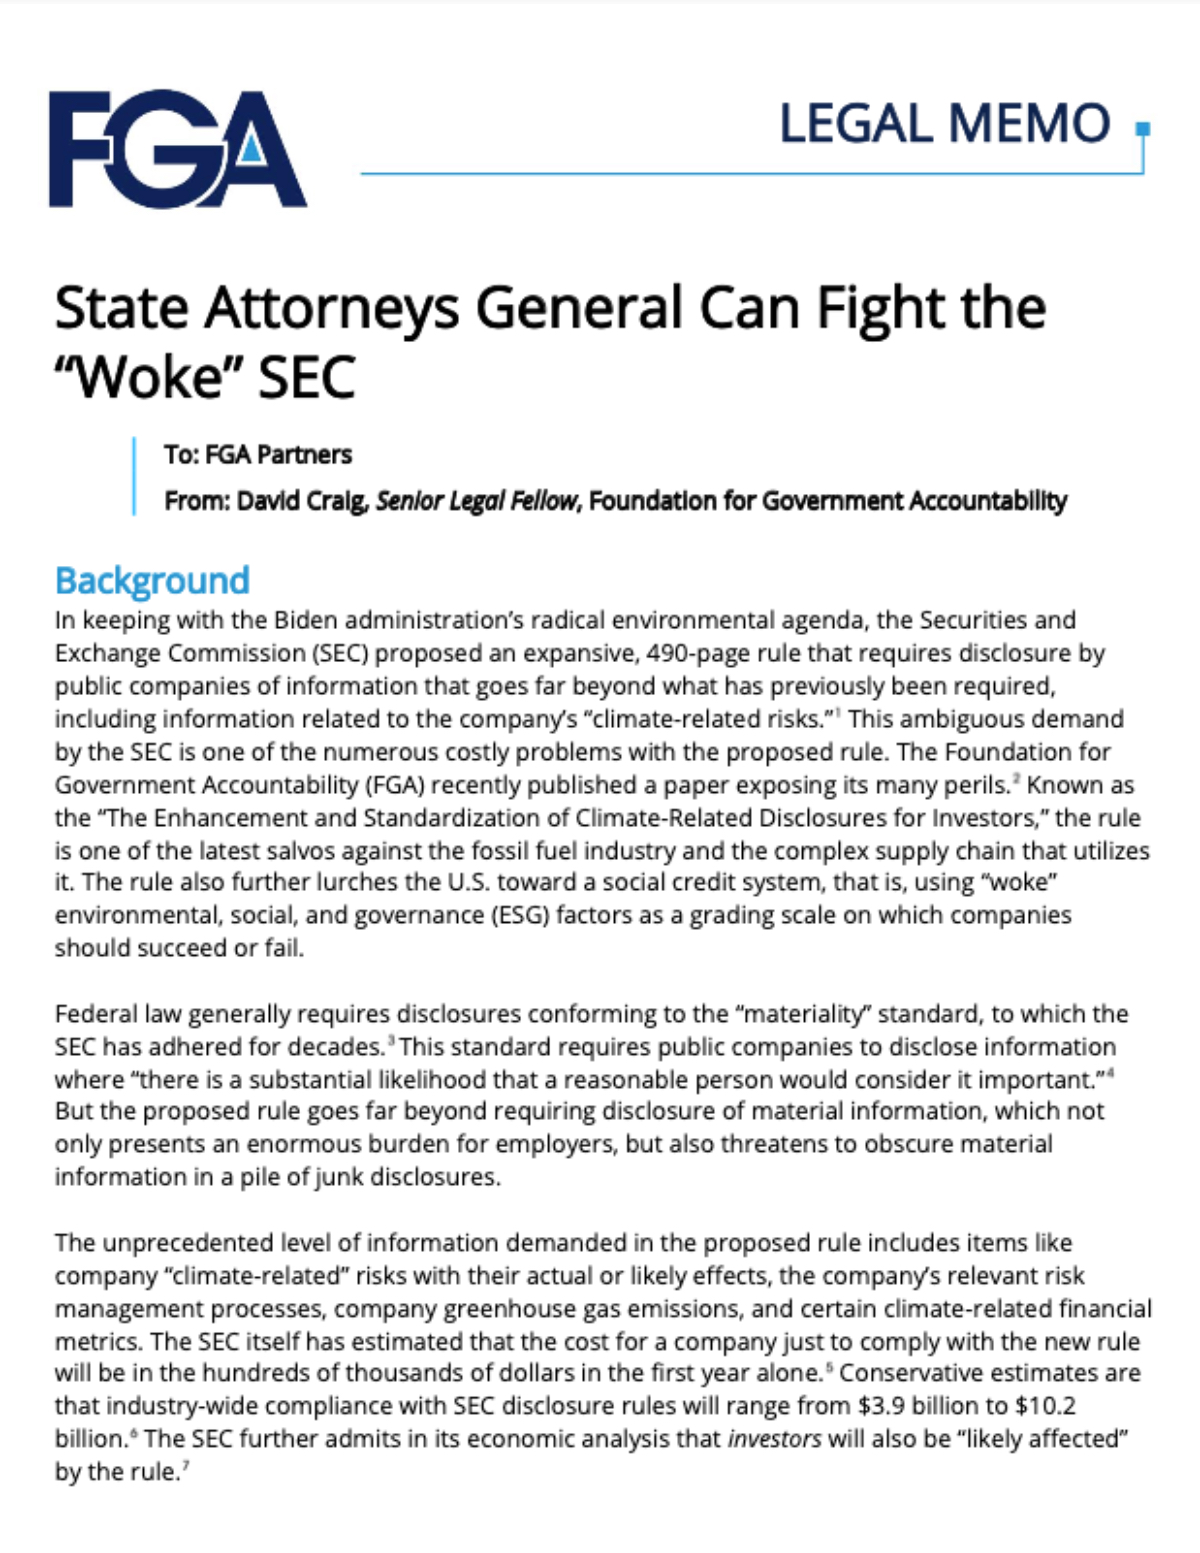 State Attorneys General Can Fight the “Woke” SEC